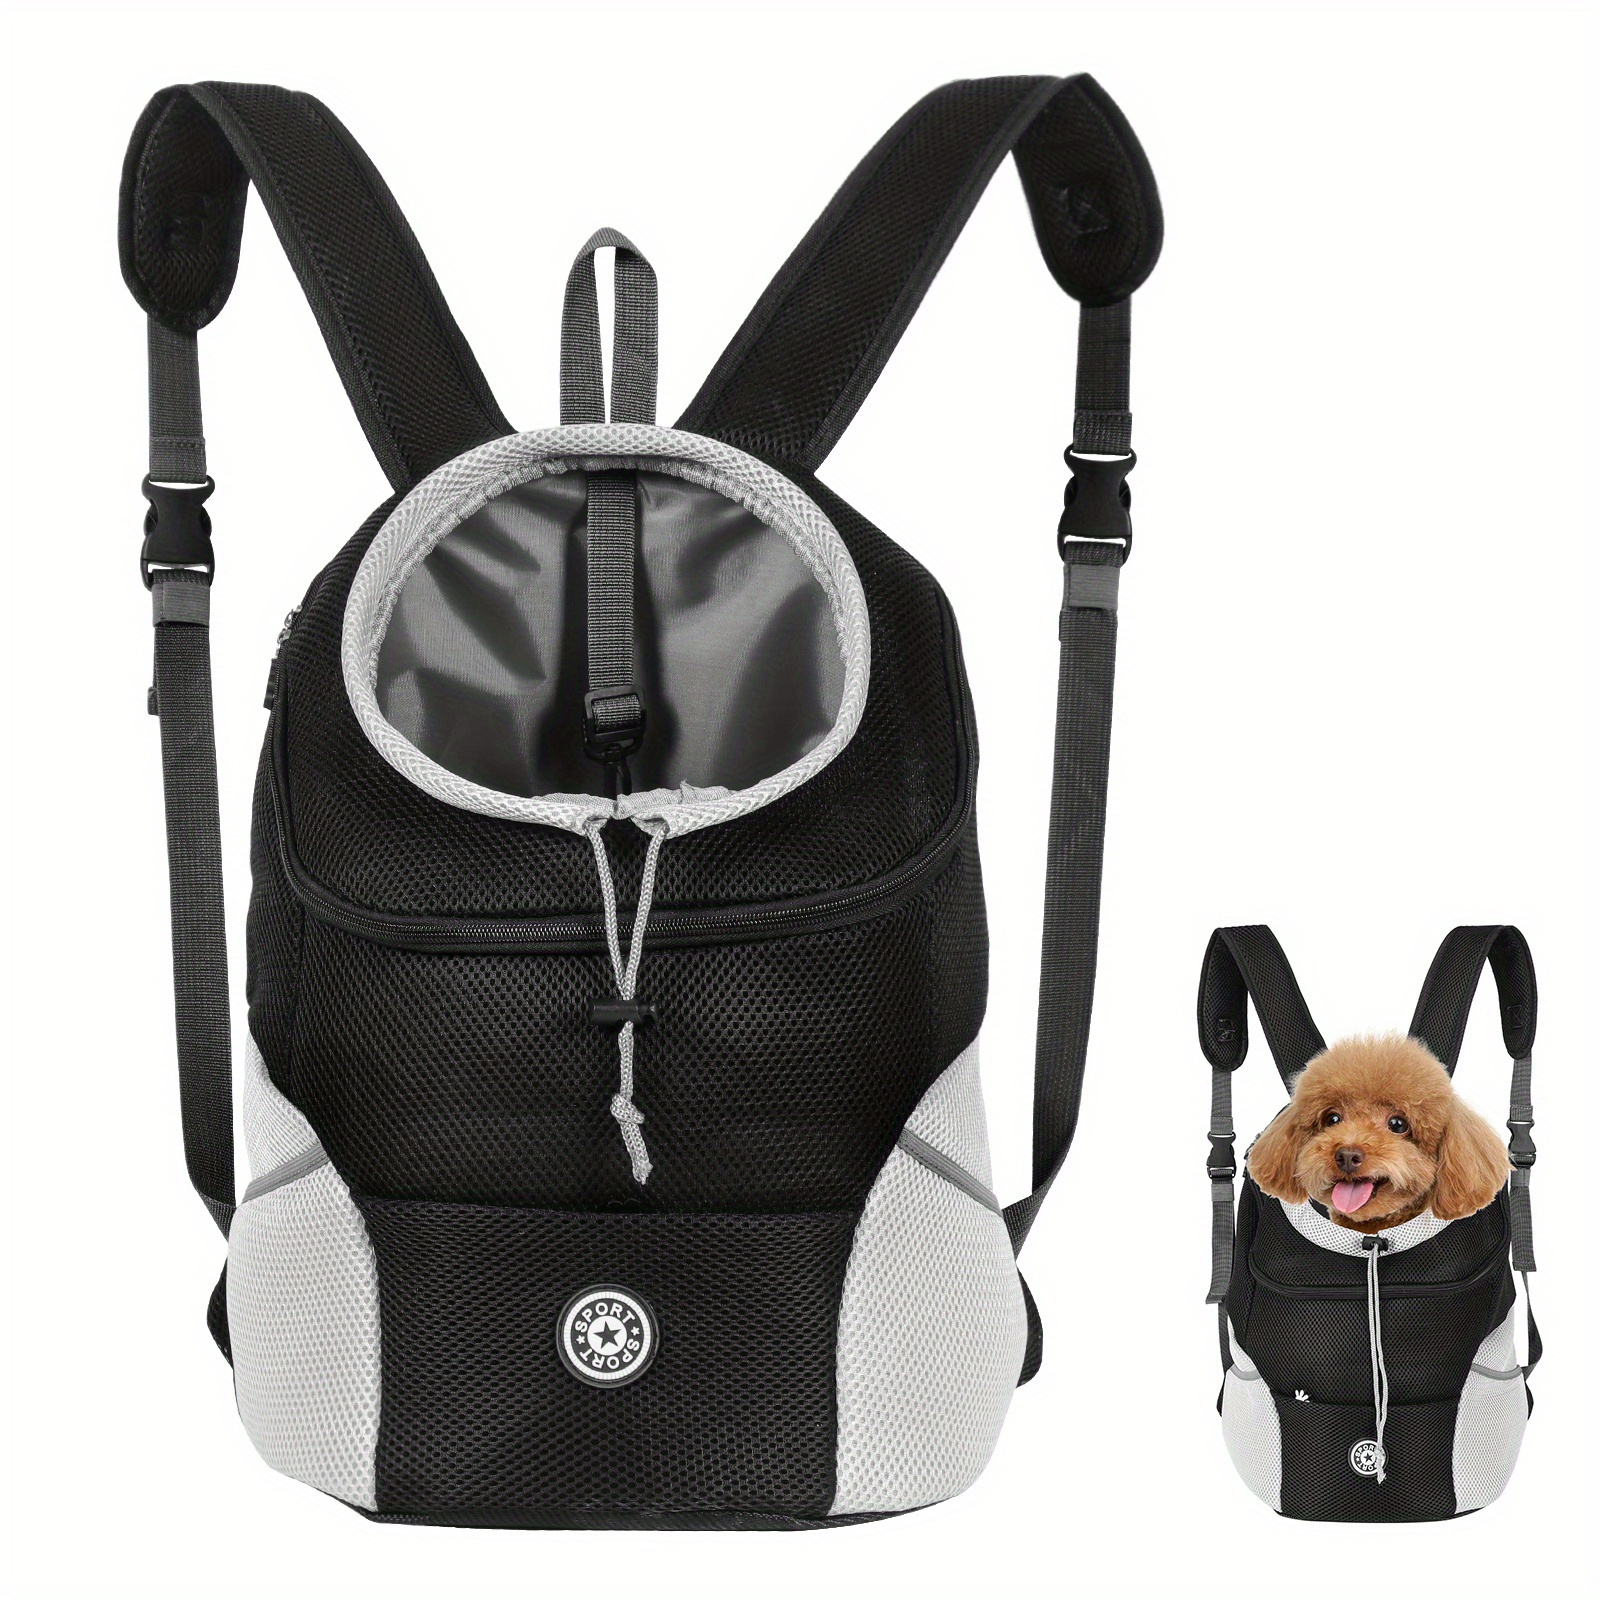 

Breathable Padded Dog Backpack Carrier - Comfortable Front Piece For Small To Large Dogs, Secure Zip Closure, Durable Nylon